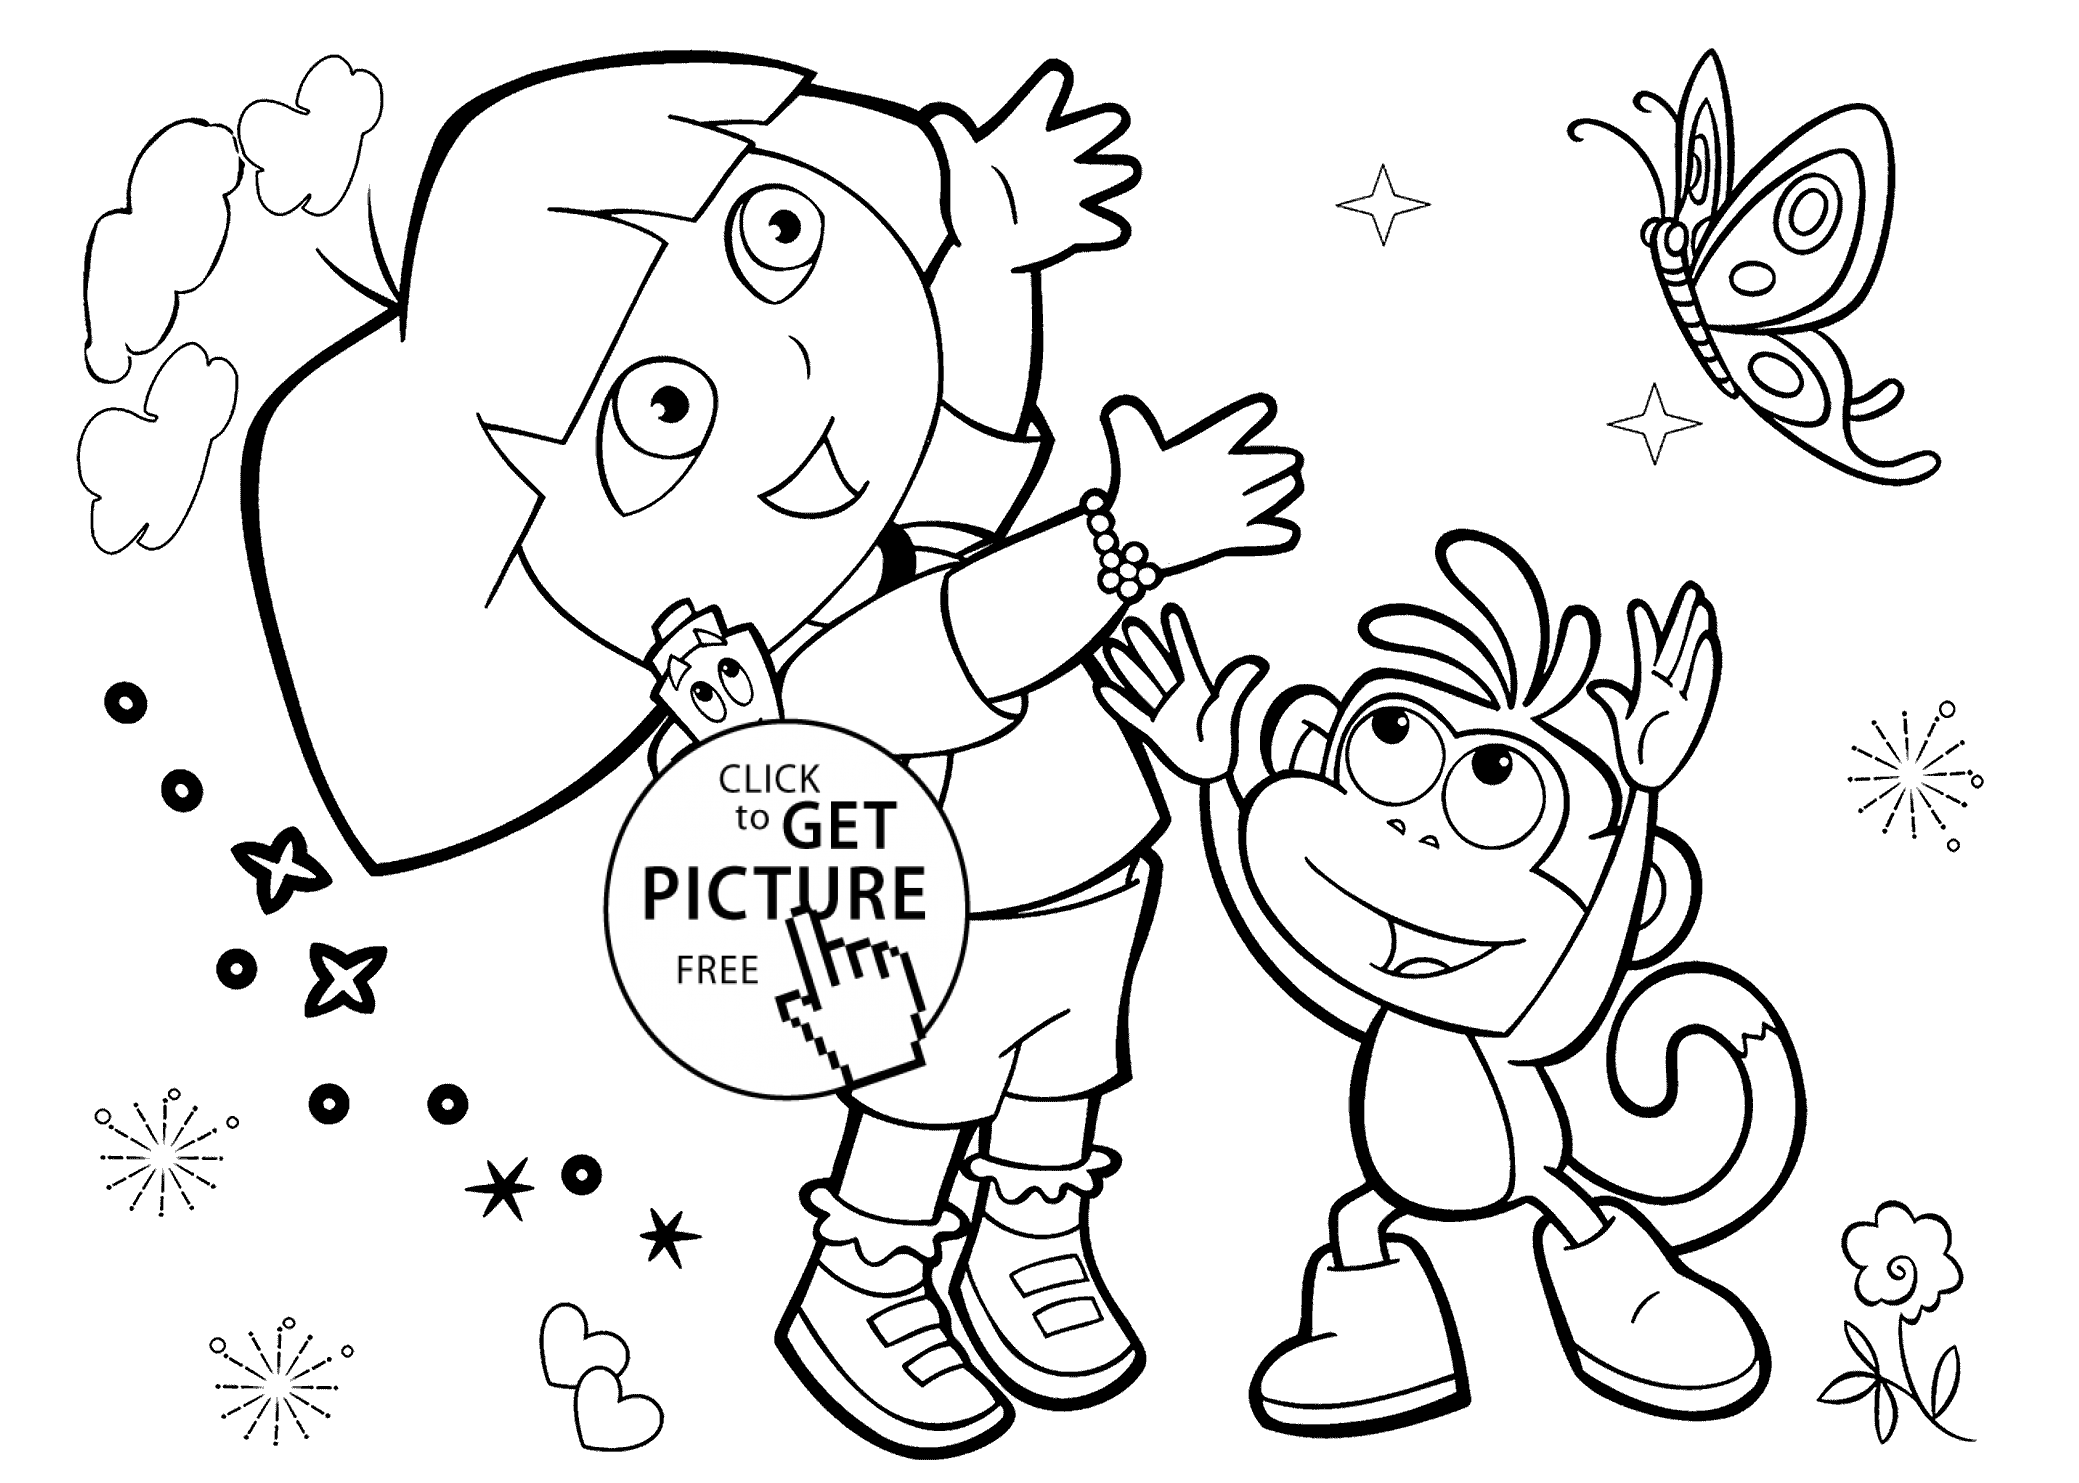 Dora coloring pages with friends printable free | coloing ...